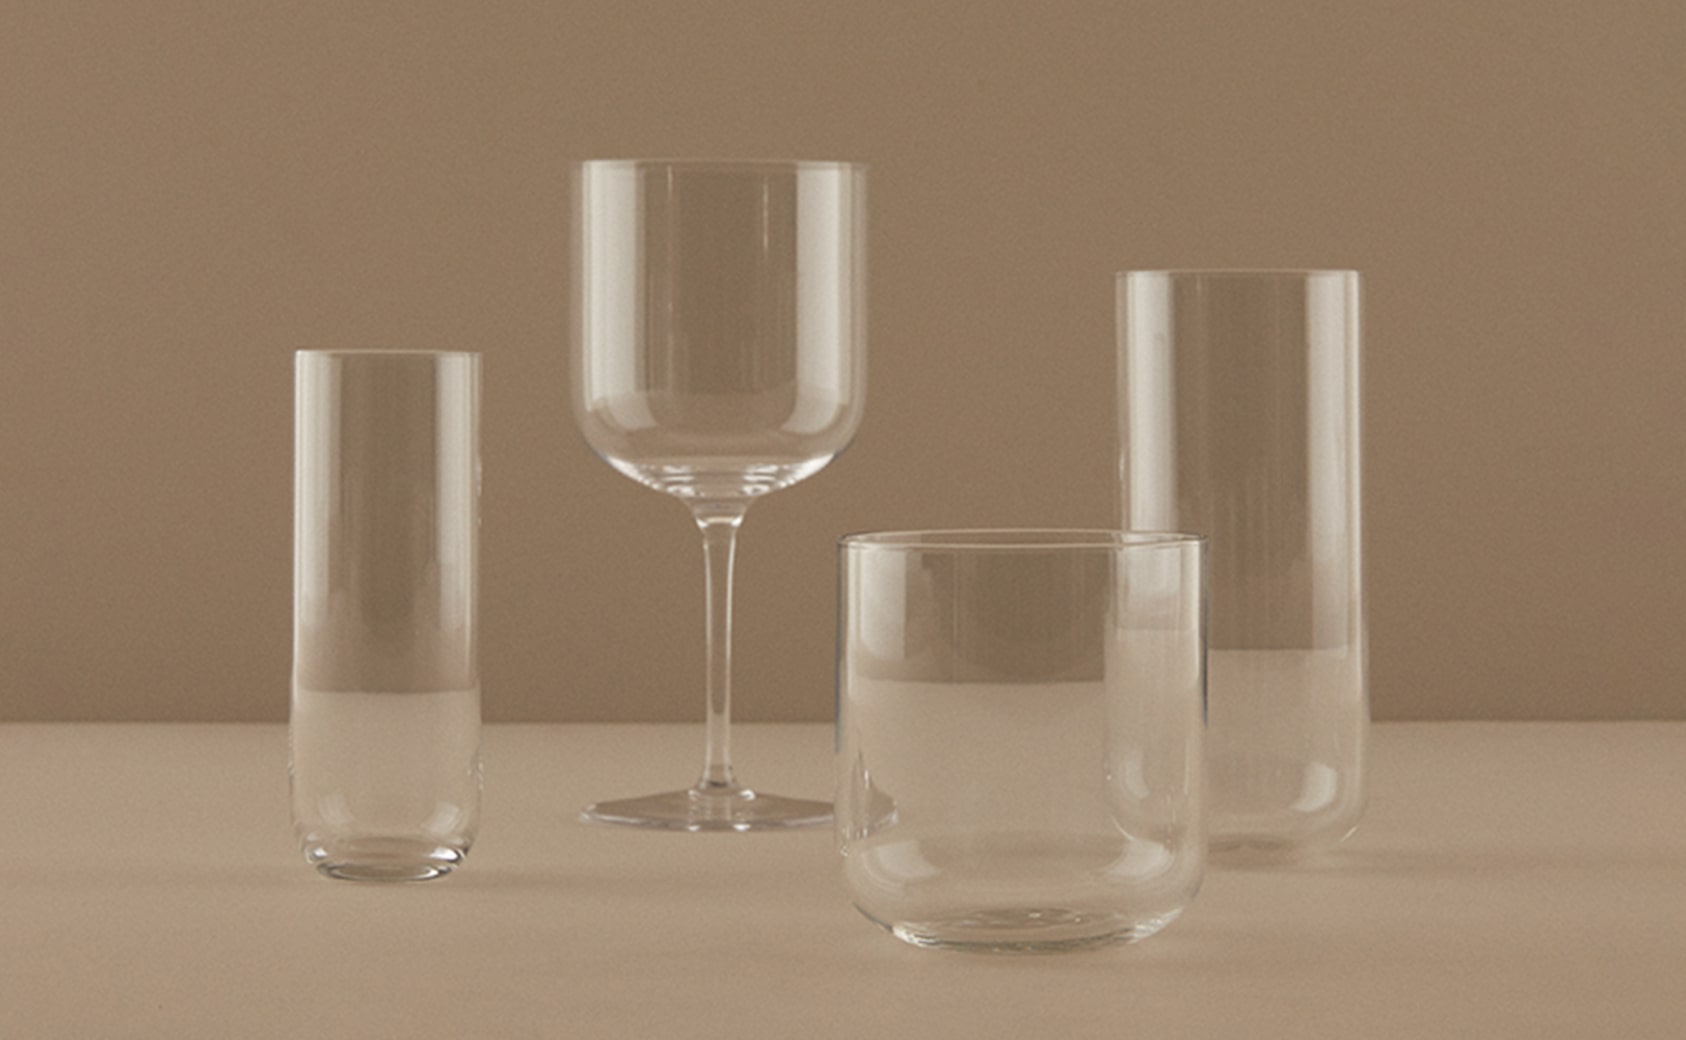 Spend $30, Get a Set of 4 Glasses for $20